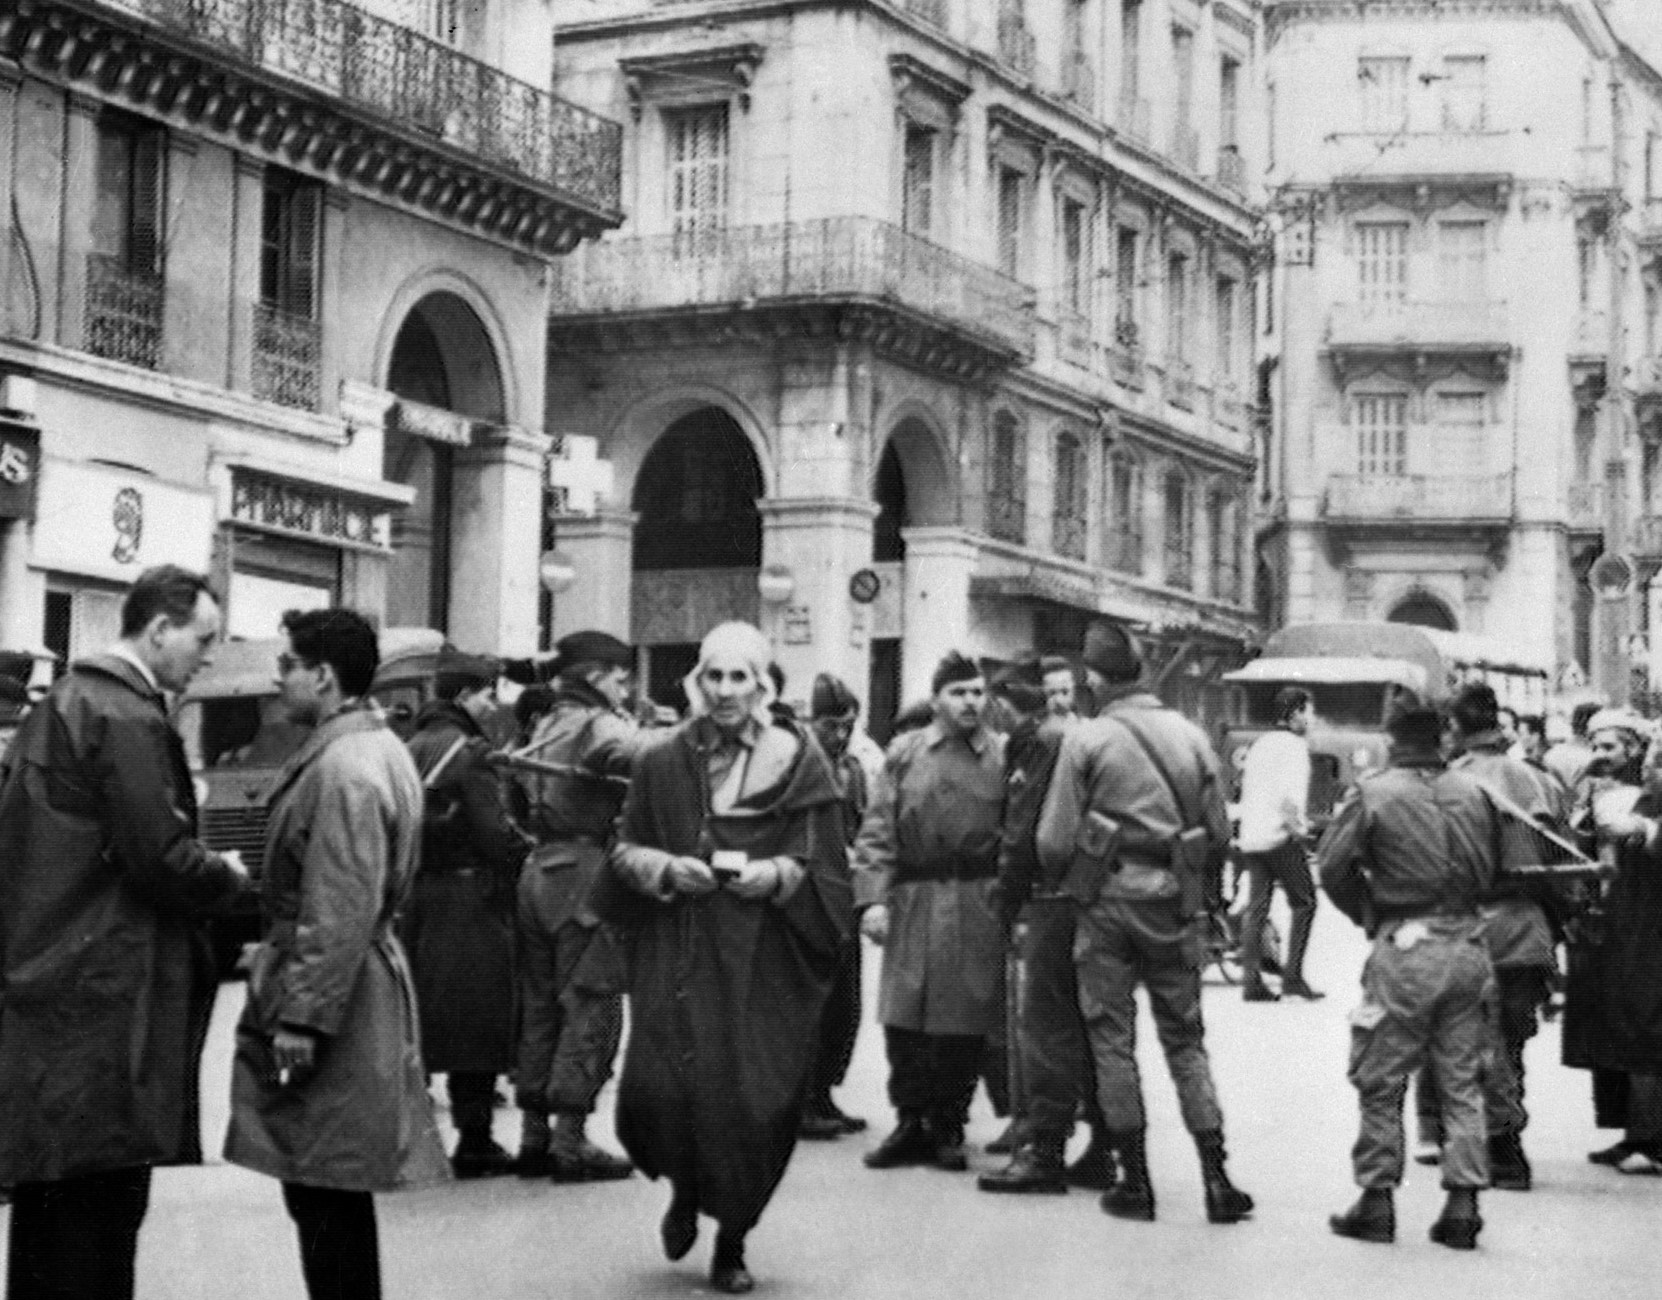 French Soldiers check the identity of Muslims at a check point on 12 December, 1960 in Algeria a few days before the UN statement acknowledging the right to the self-determination for Algerians. 